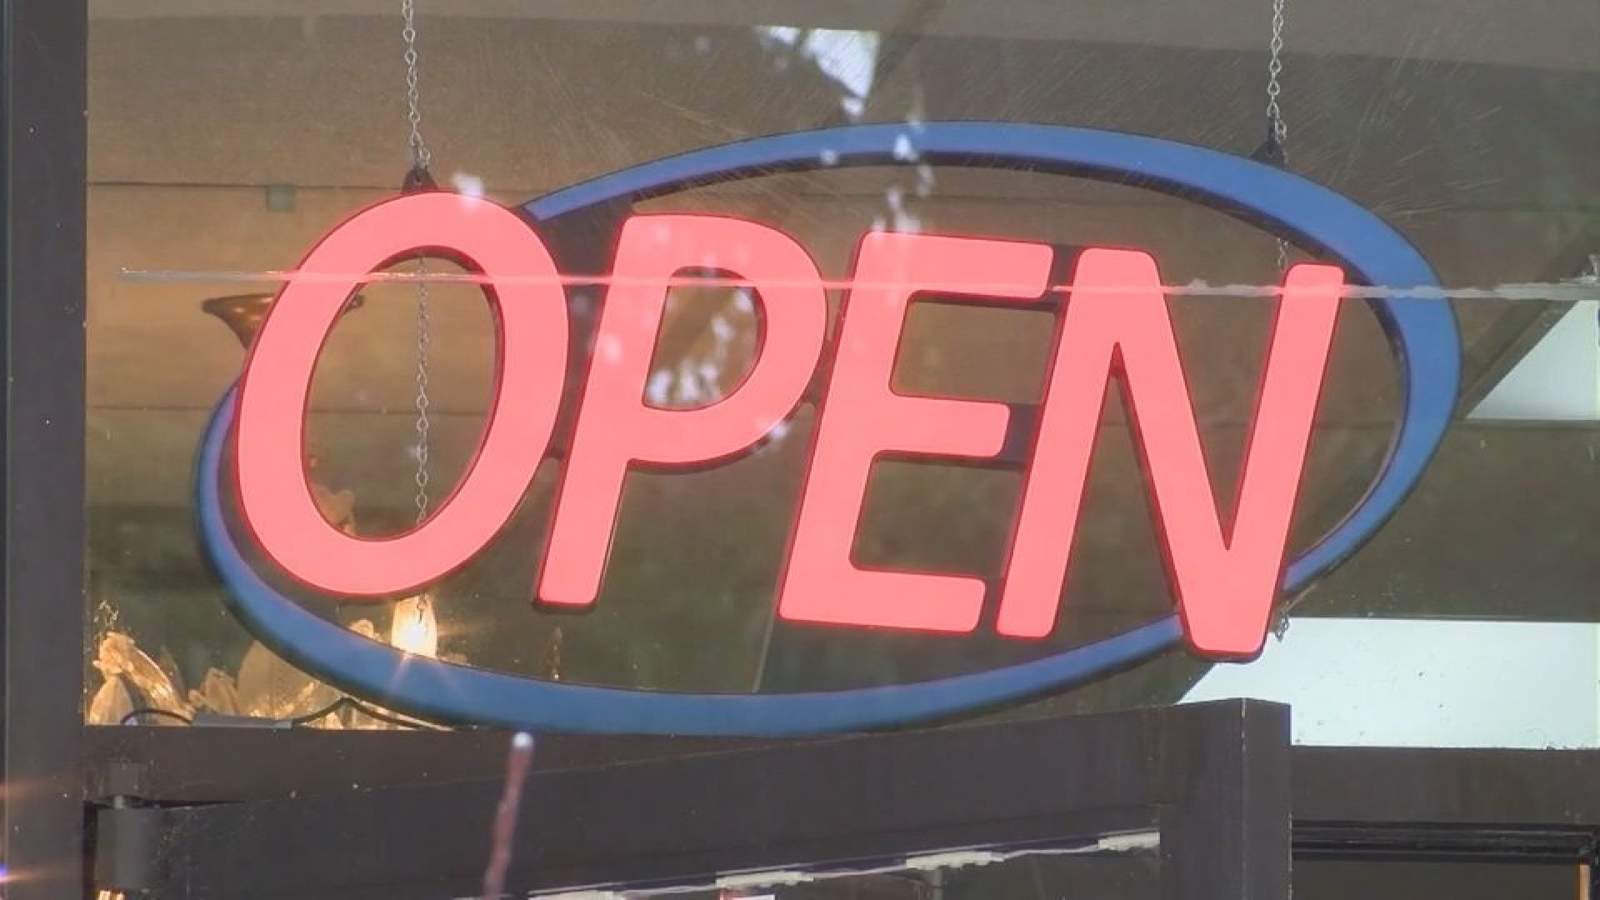 Approval of minimum wage hike draws mixed reaction among Jacksonville business owners